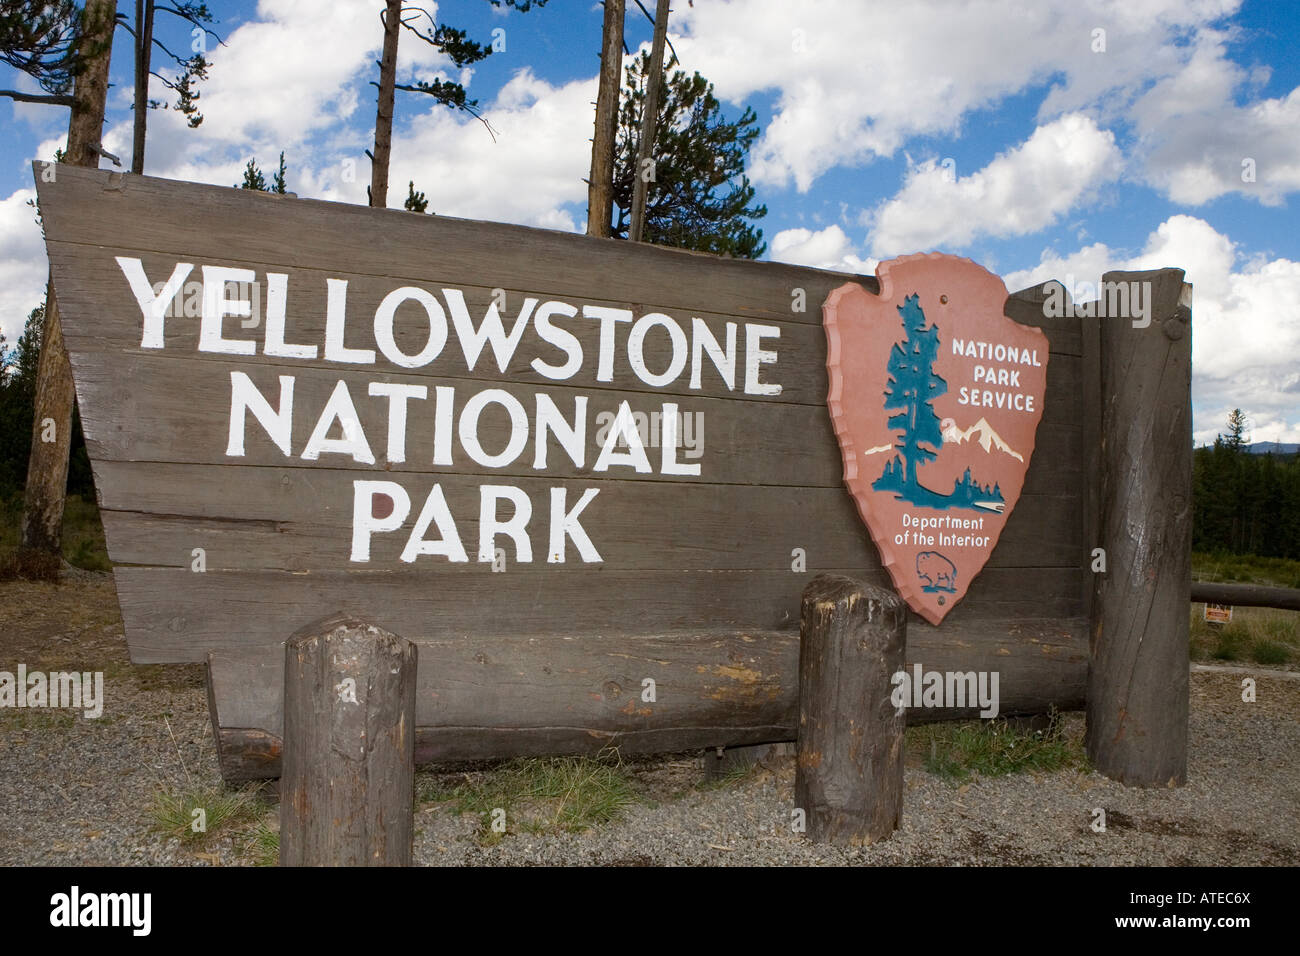 National Parks Service sign at the Southern entrance Yellowstone National Park, Wyoming Stock Photo